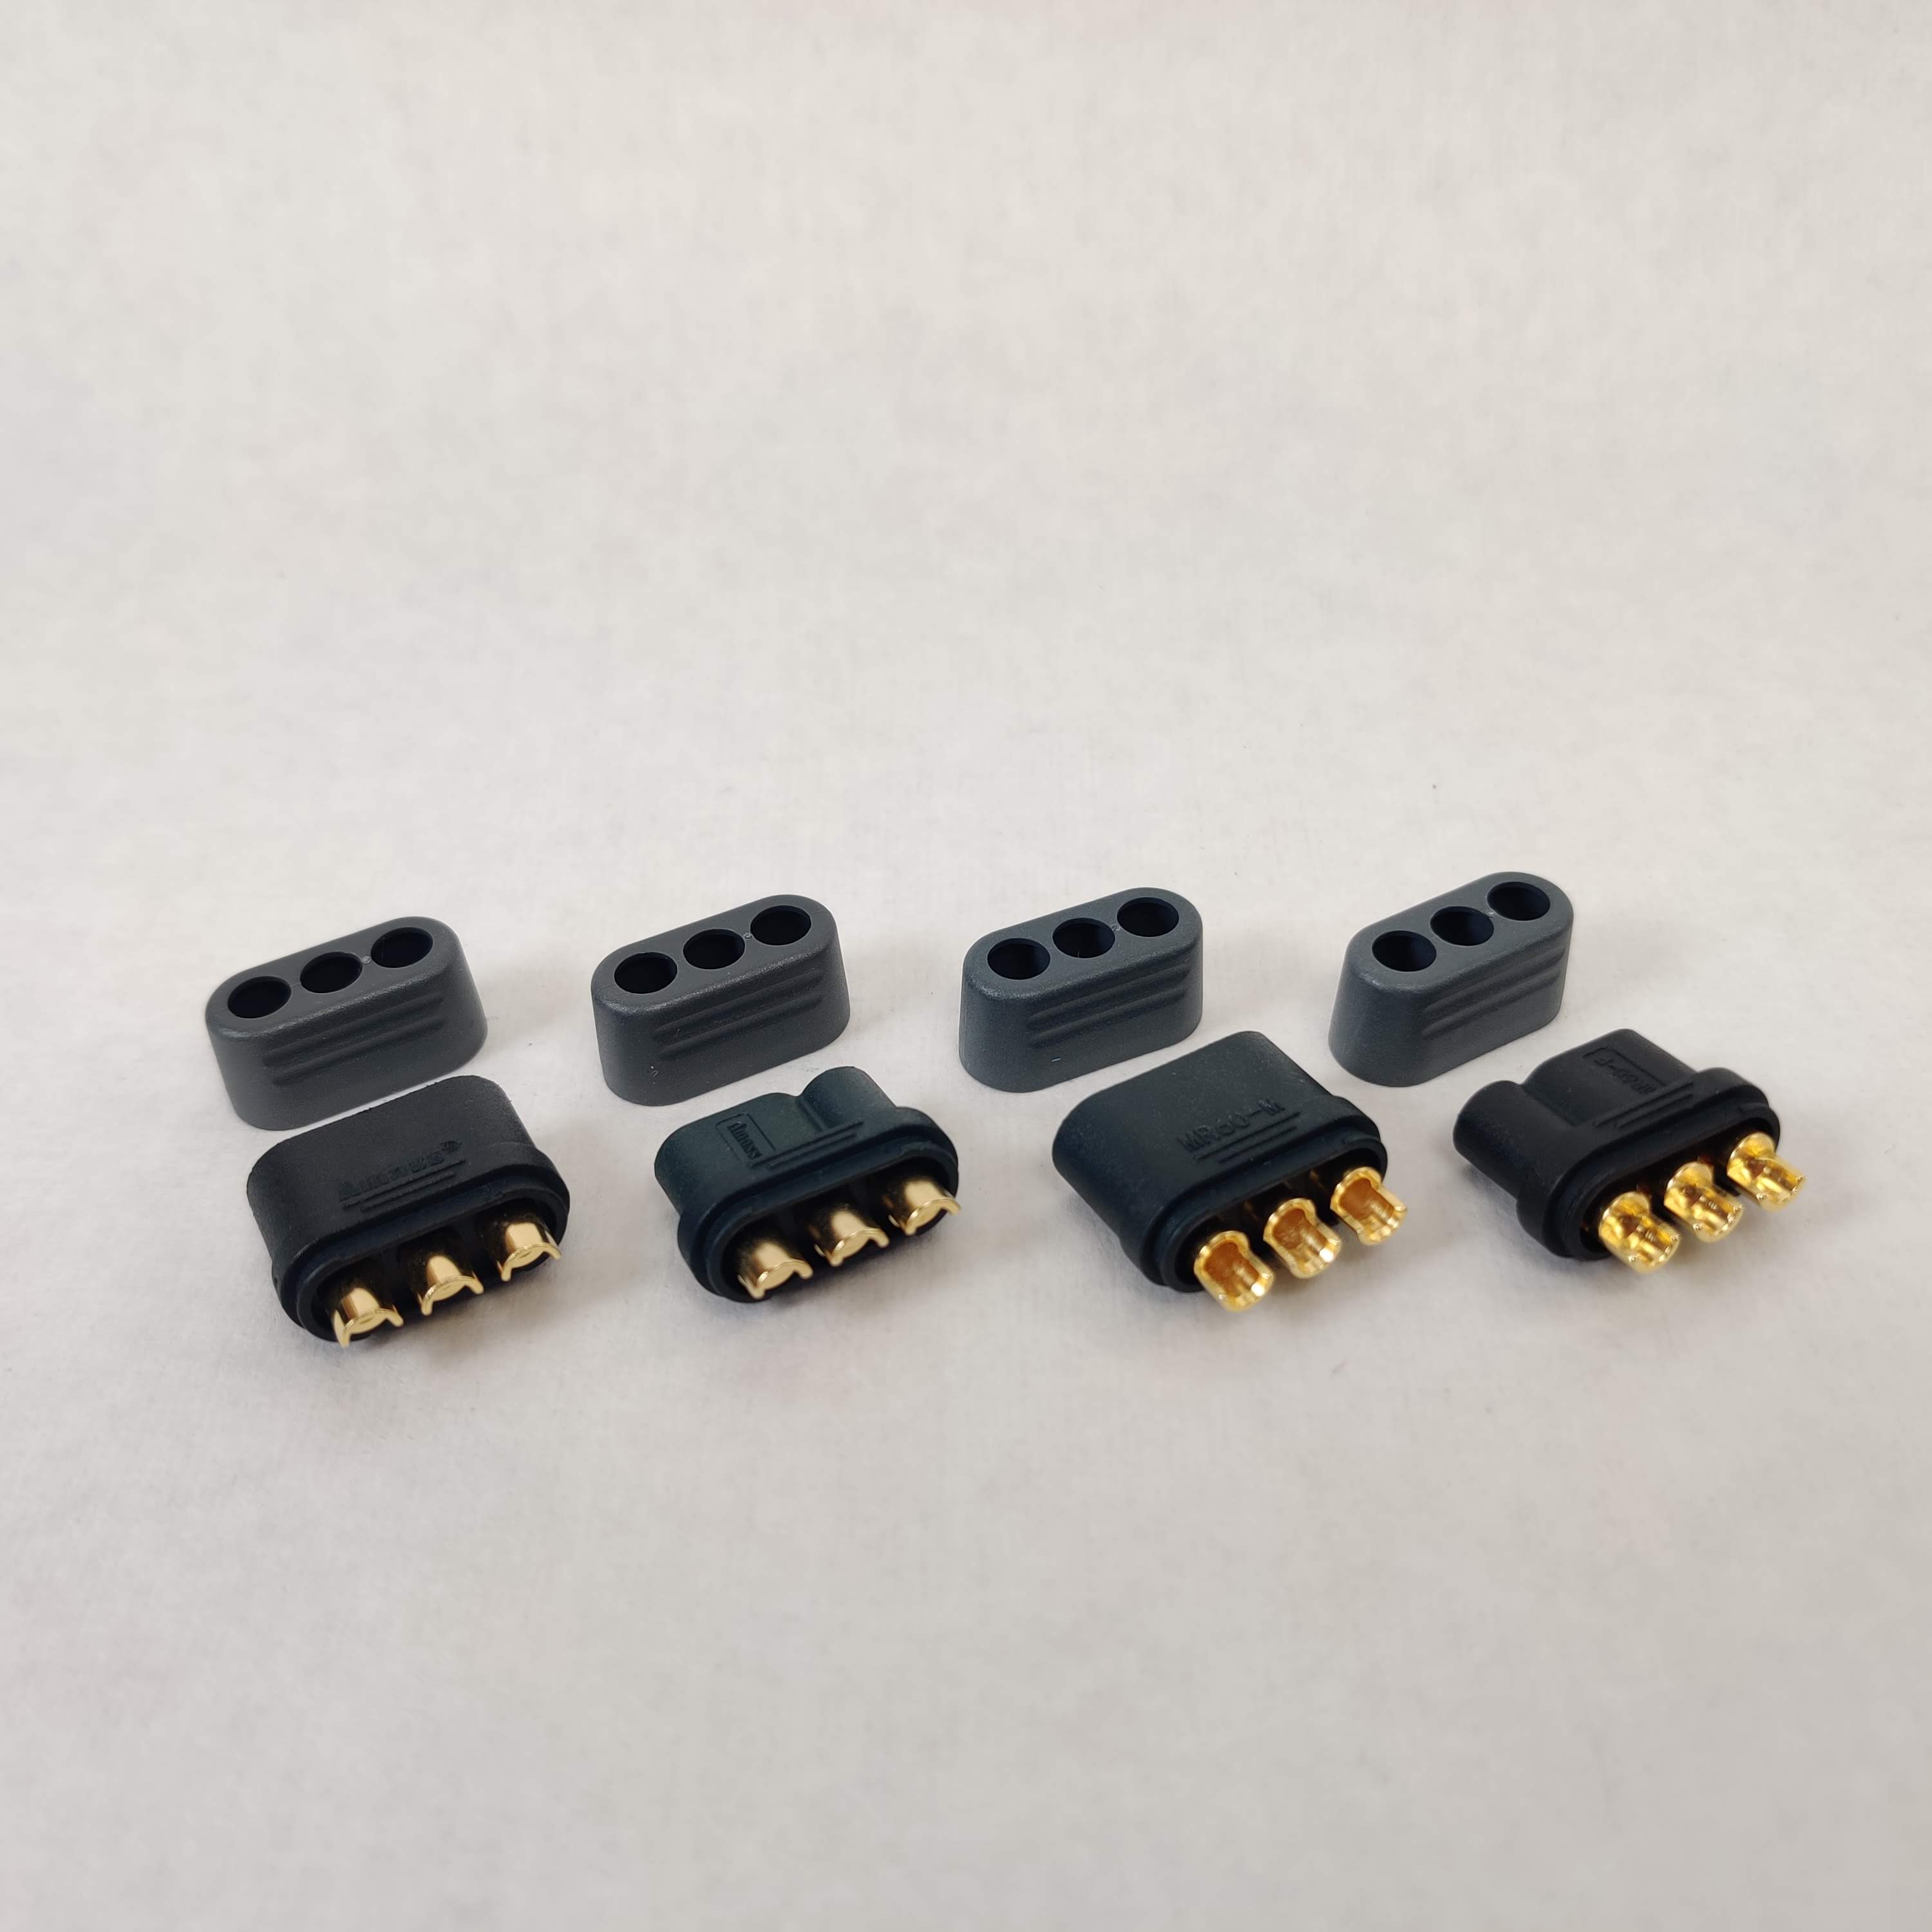 Amass MR60 Connector - 2 Sets